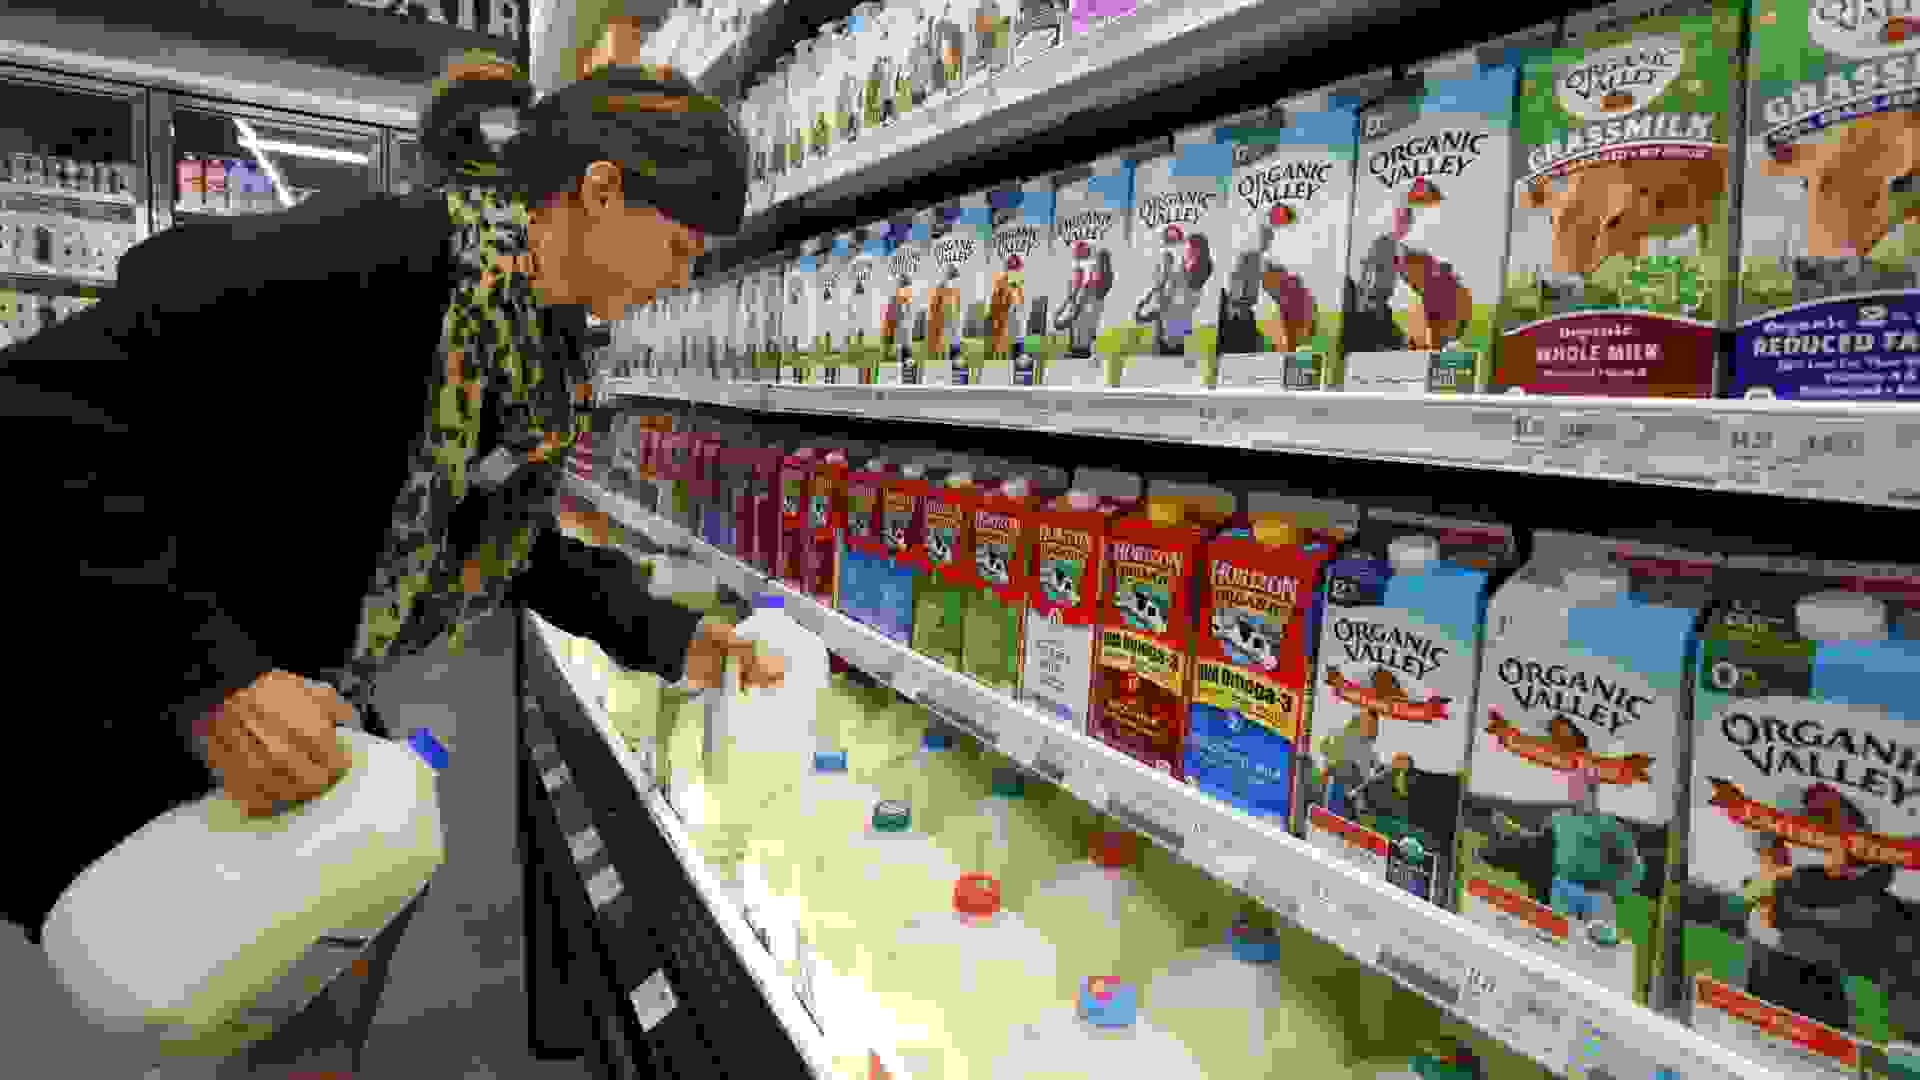 Mandatory Credit: Photo by Brennan Linsley/AP/Shutterstock (6126122a)Reyna DeLoge Grocery and dairy assistant Reyna DeLoge stocks dairy products that only use milk from pasture-raised cows, at Vitamin Cottage Natural Grocers, in Denver.